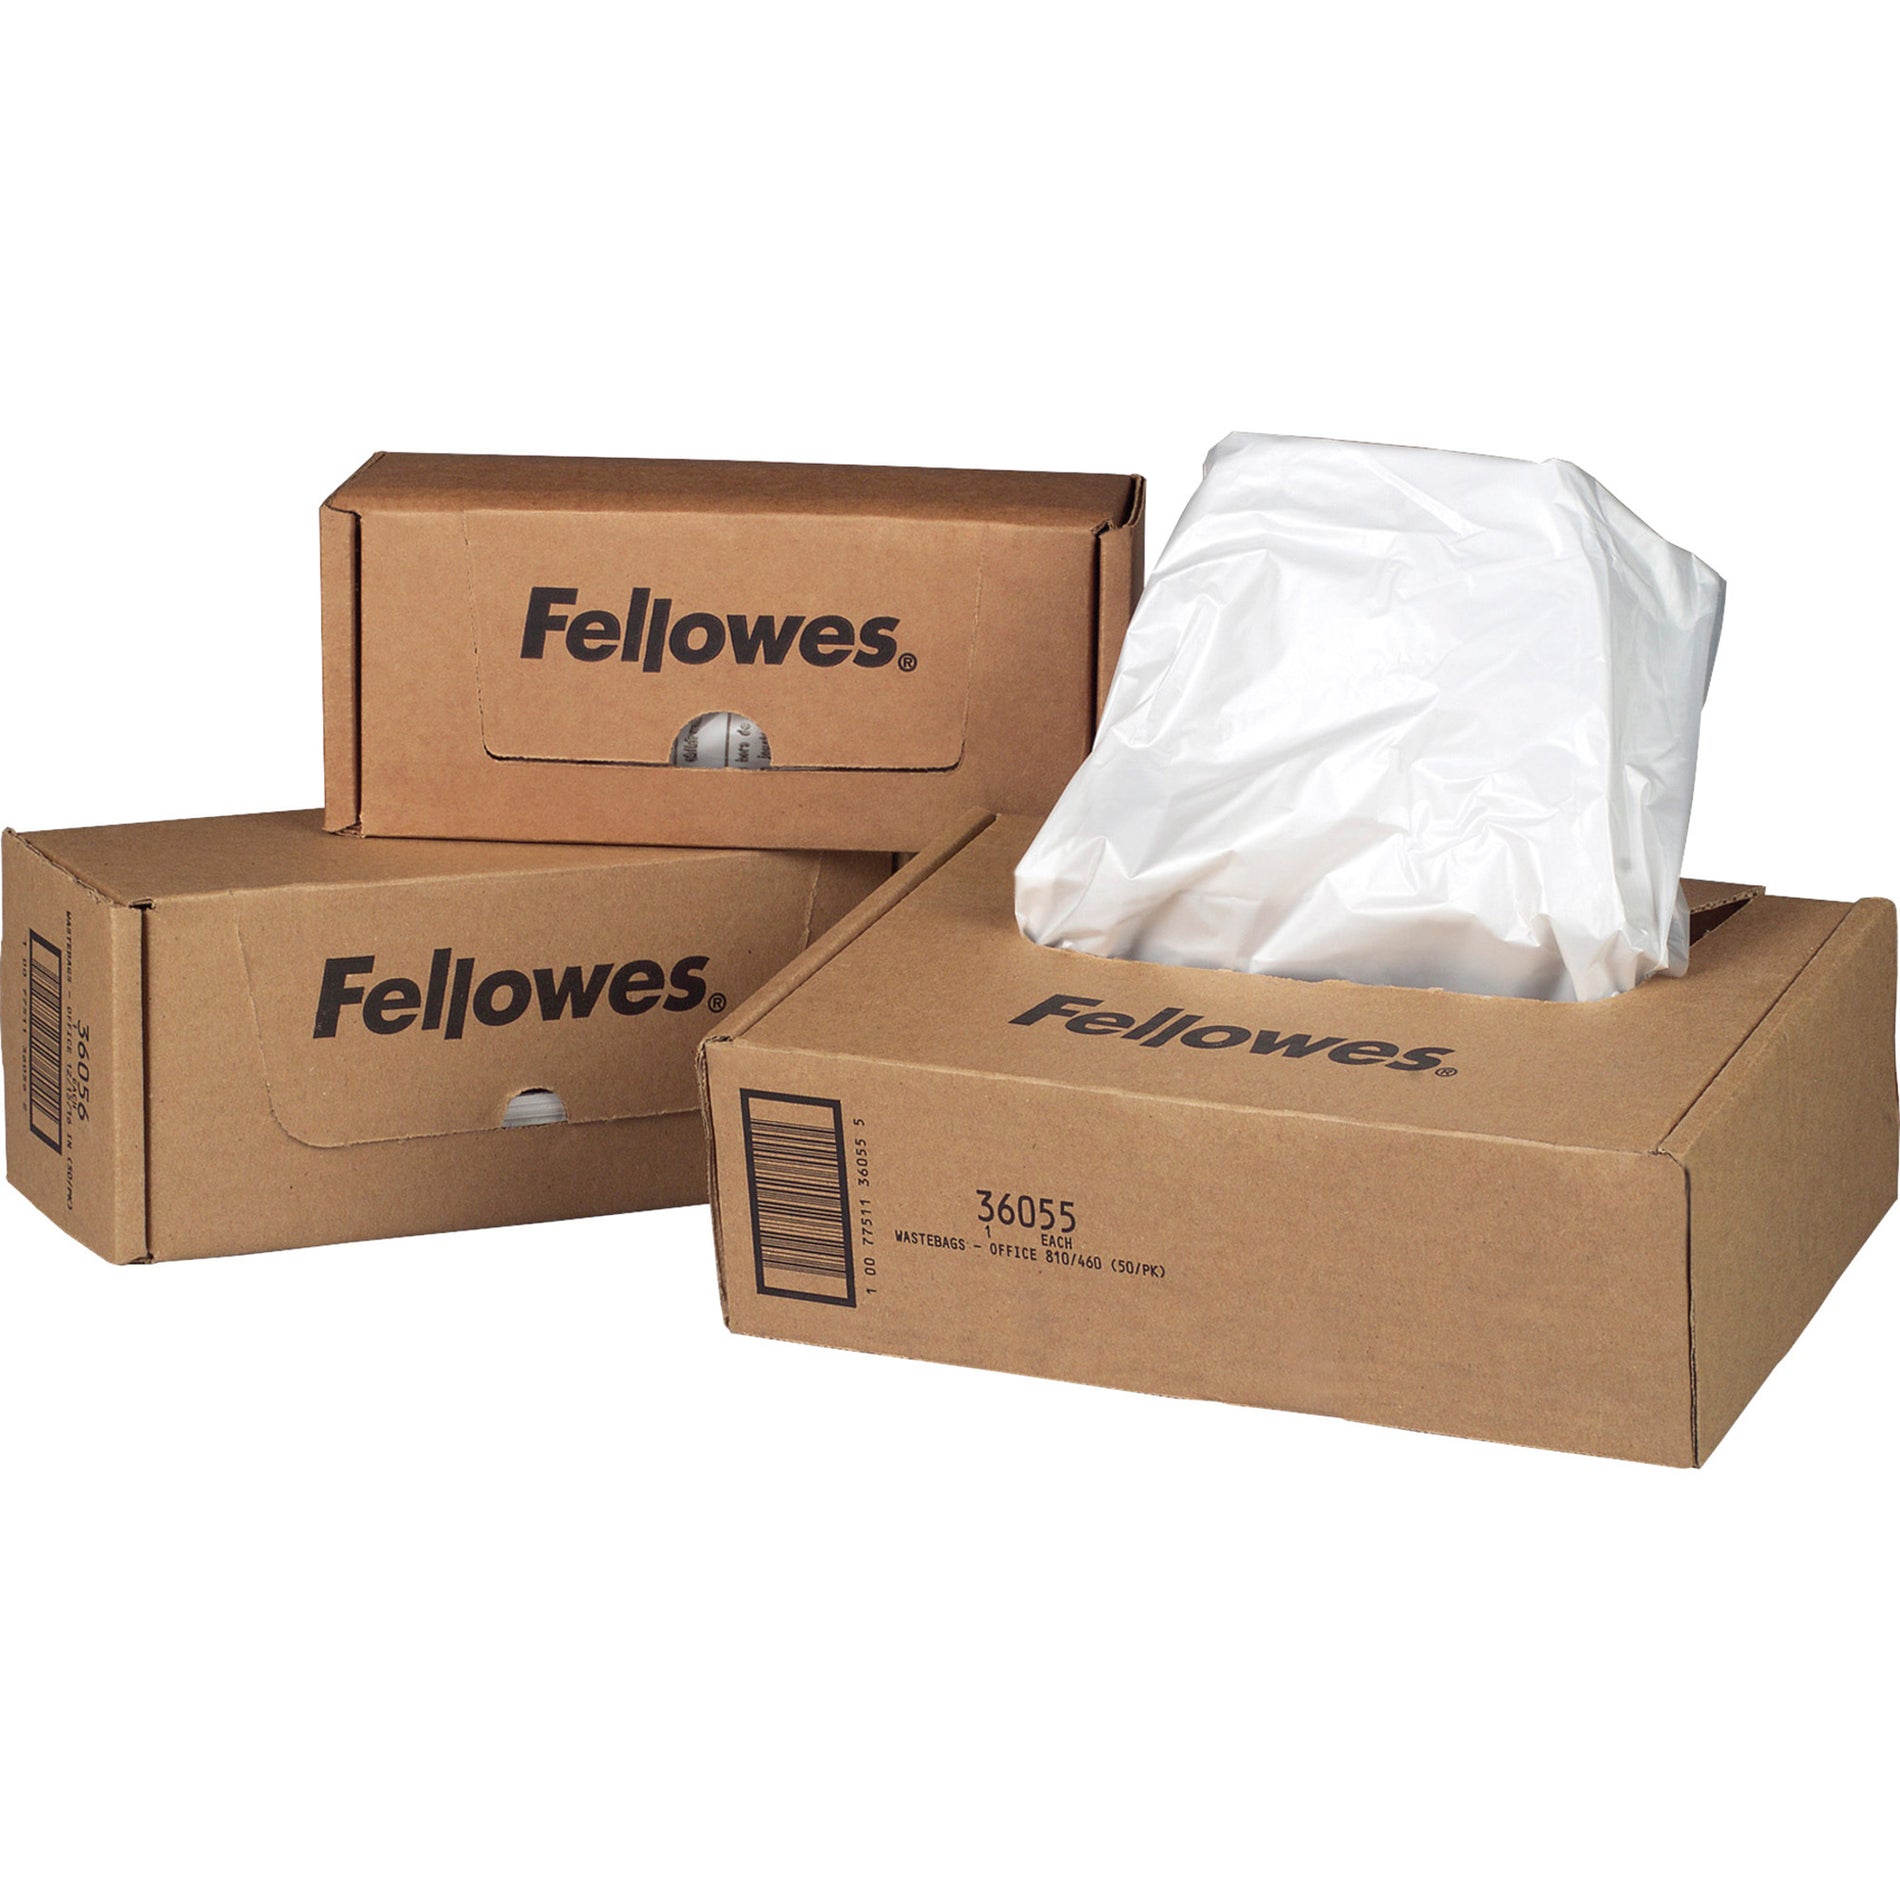 Fellowes 36055 Waste Bags for C-380 Series Shredders, 32 gal, Disposable, Durable, Recyclable